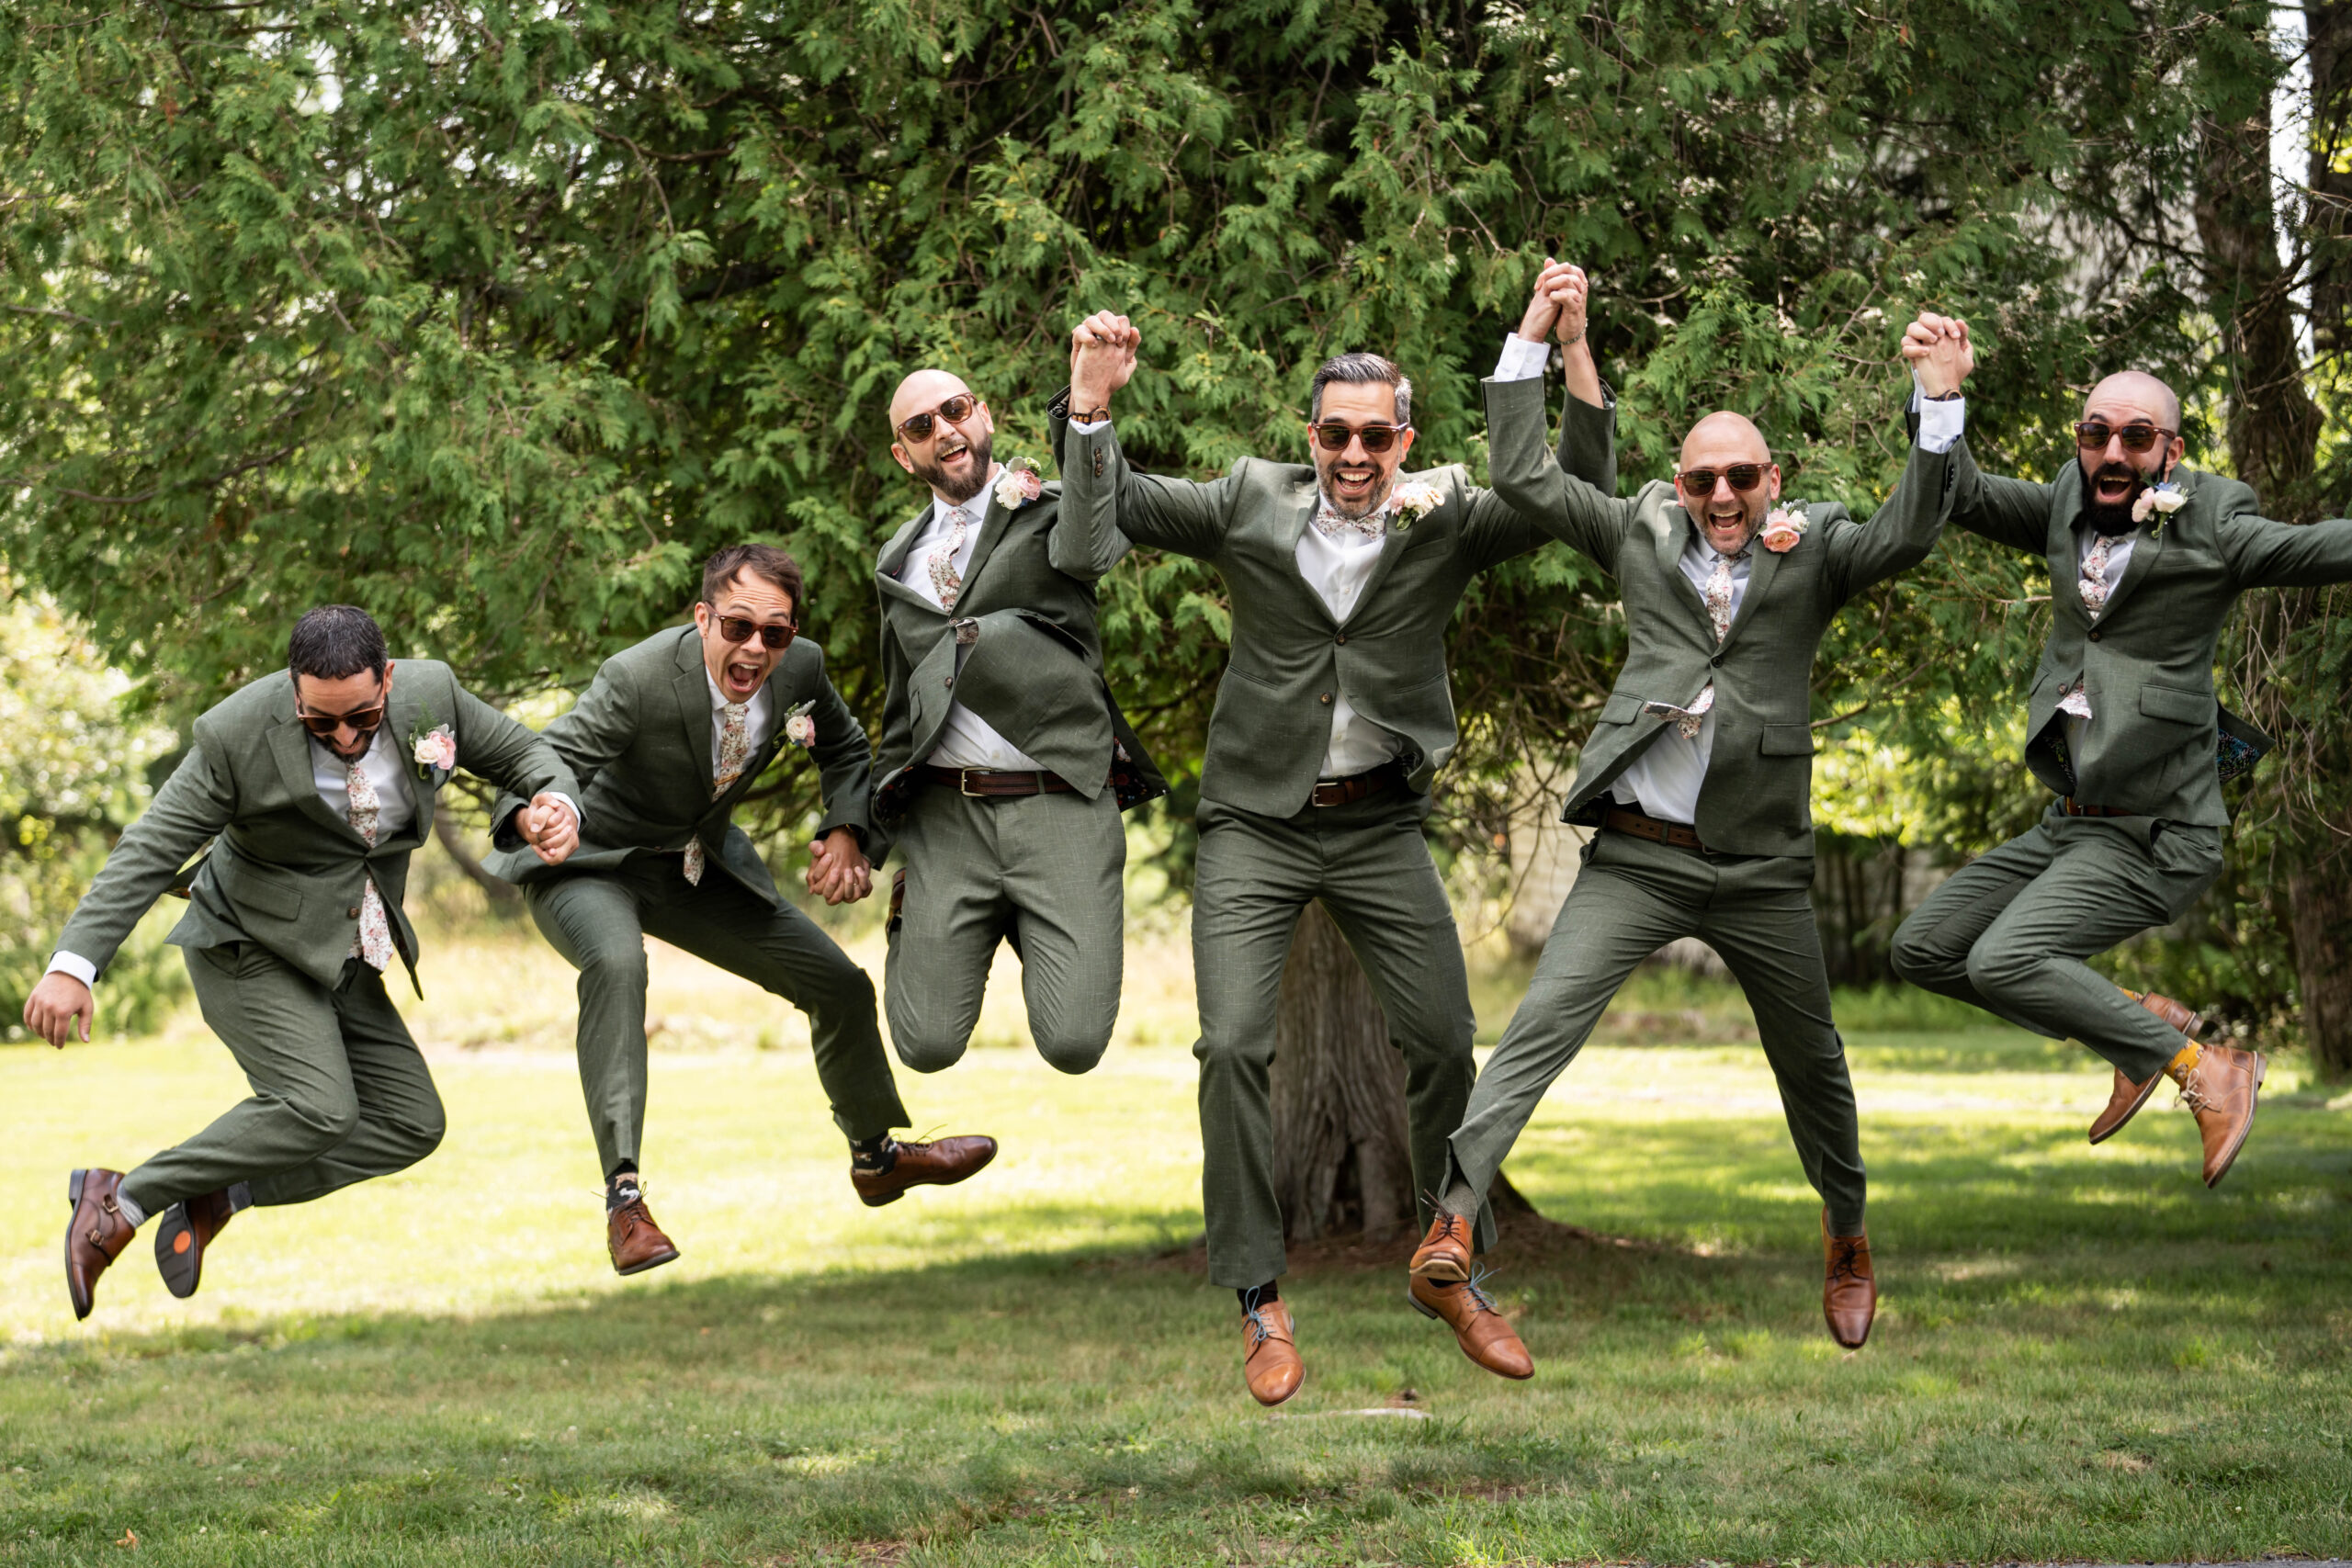 groom and five groomsmen dressed in forest green suits and pink boutonnieres jumping in midair while smiling and laughing at the camera with green trees and grass in the background